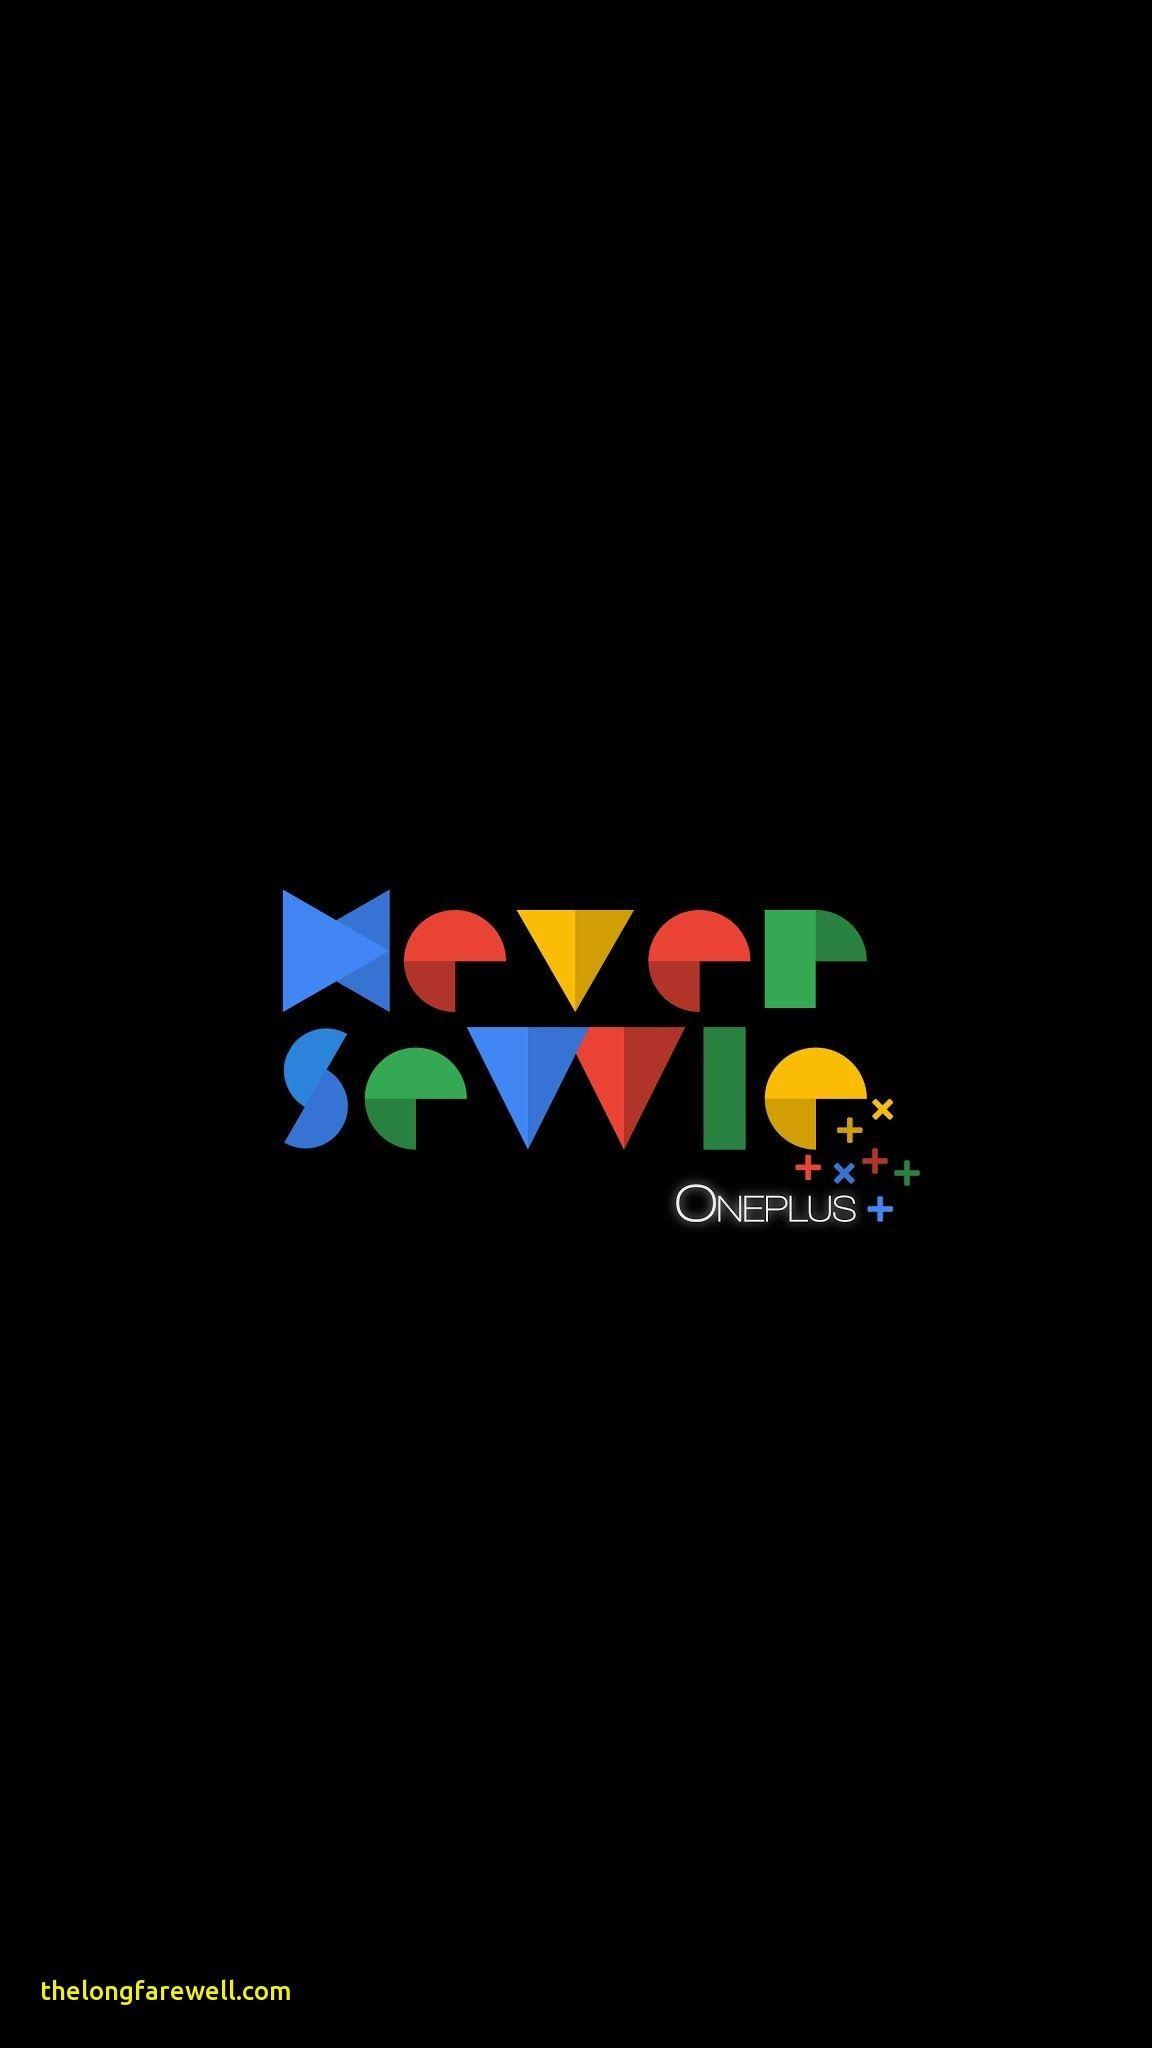 Amoled Wallpaper Android - Oneplus wallpaper